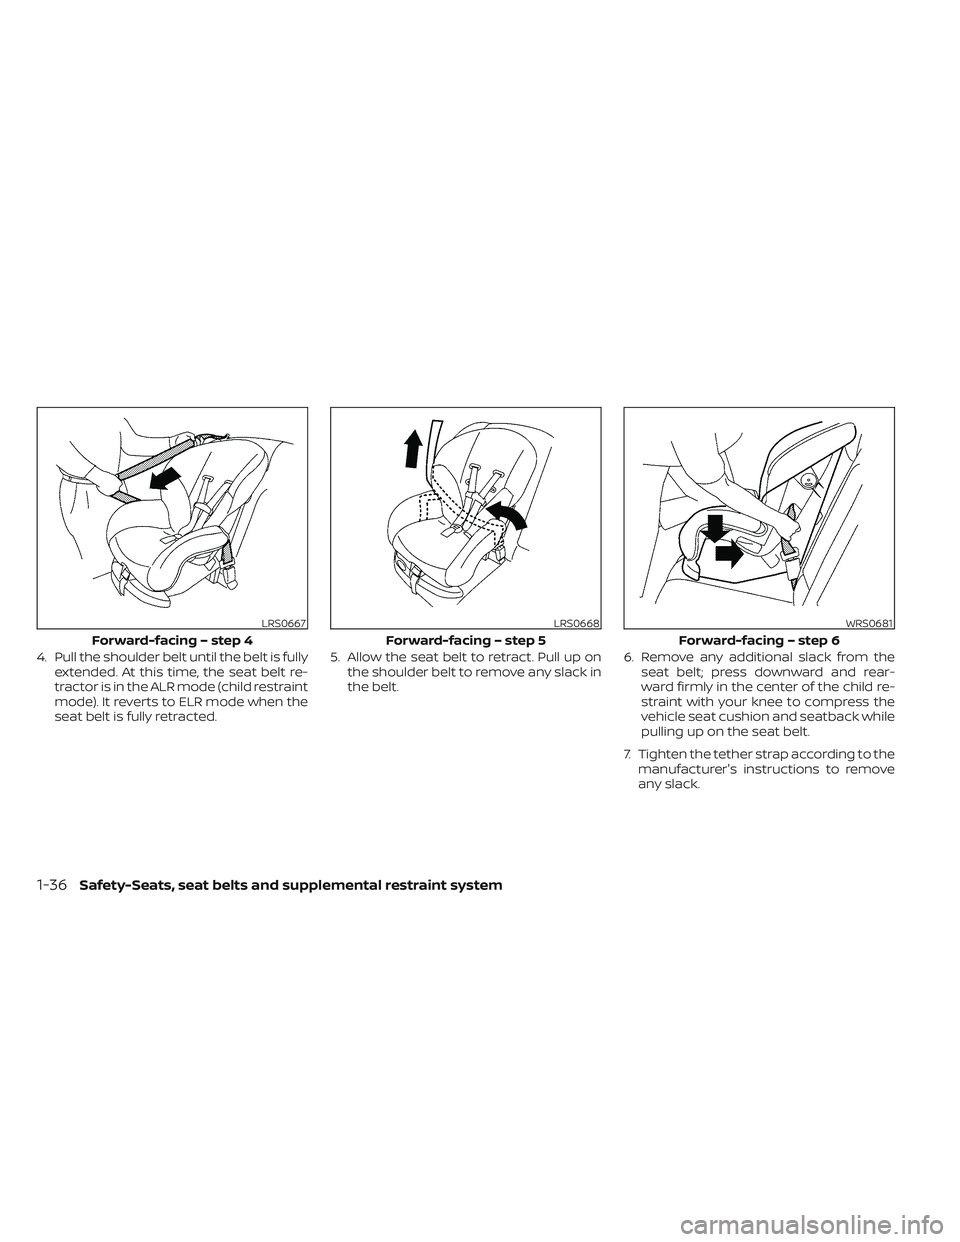 NISSAN MAXIMA 2023 Workshop Manual 4. Pull the shoulder belt until the belt is fullyextended. At this time, the seat belt re-
tractor is in the ALR mode (child restraint
mode). It reverts to ELR mode when the
seat belt is fully retract